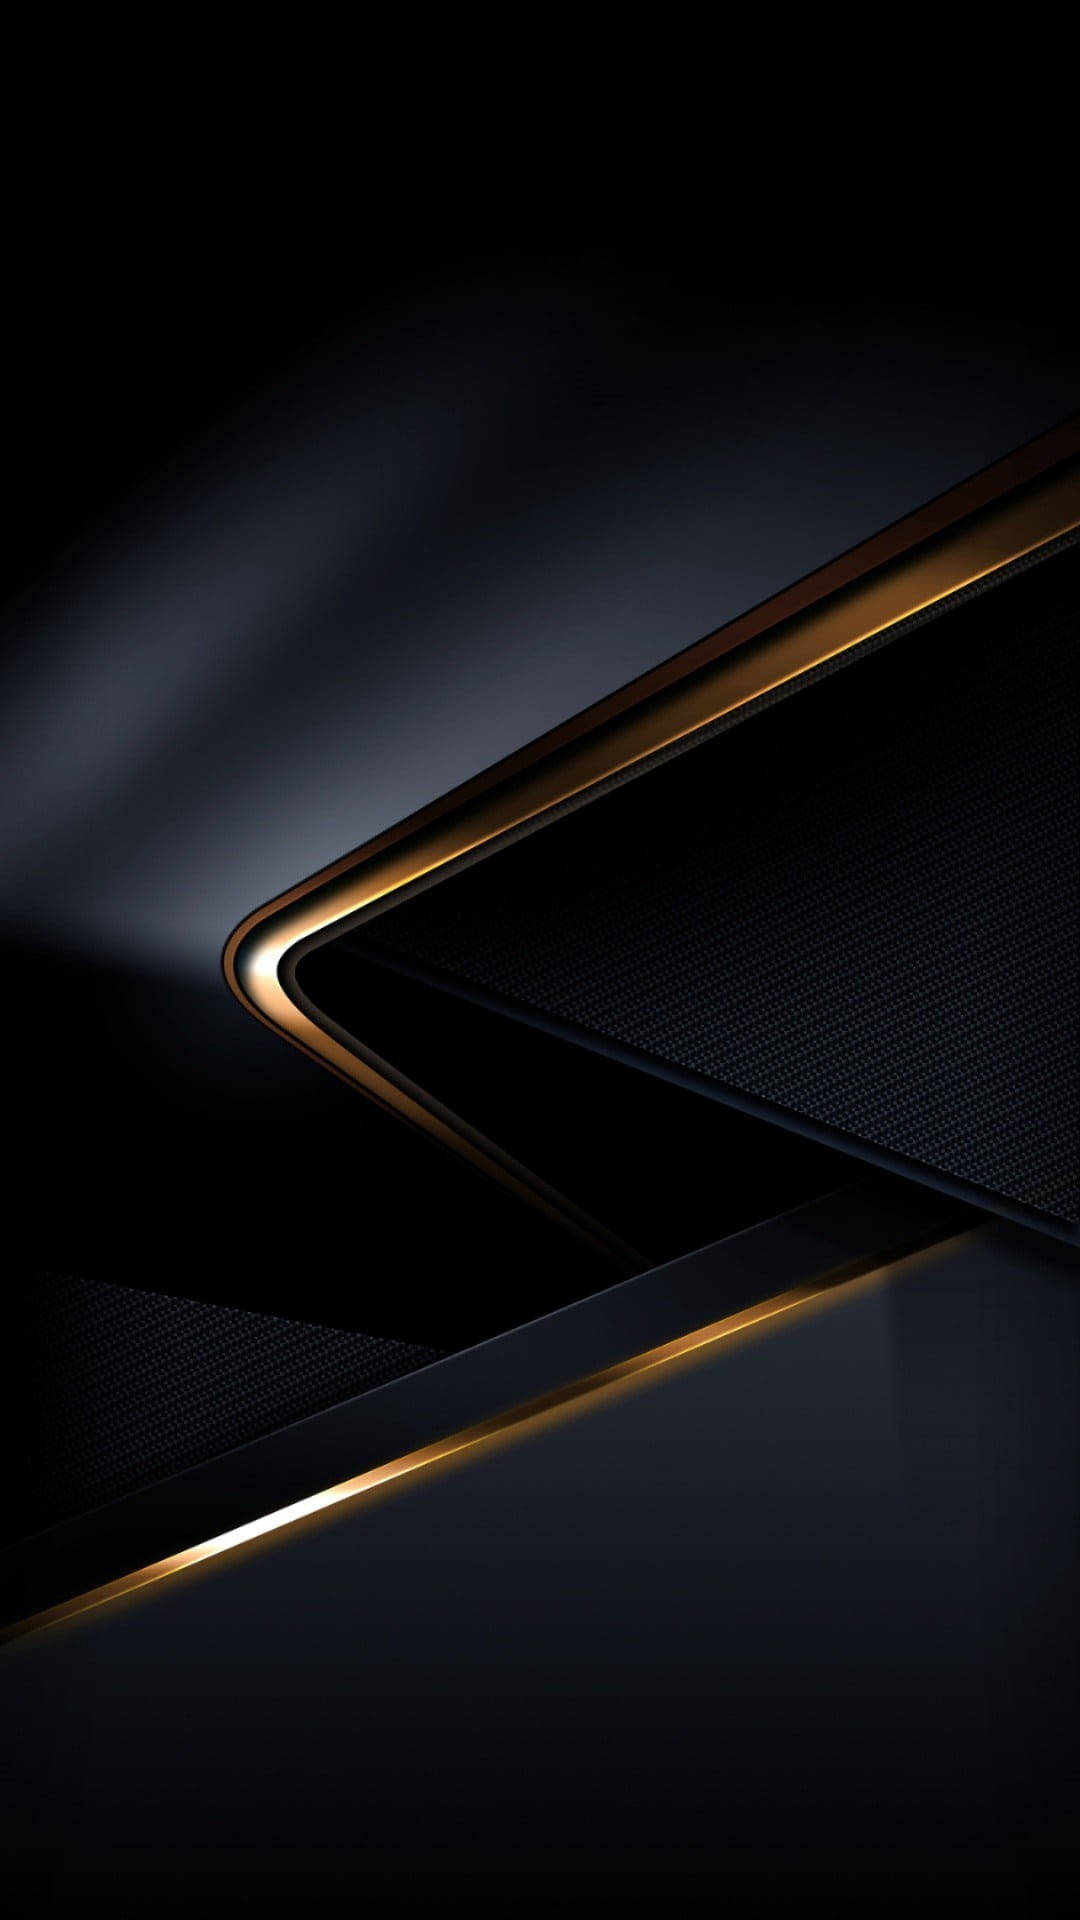 Abstract 3D Black And Gold iPhone Wallpaper